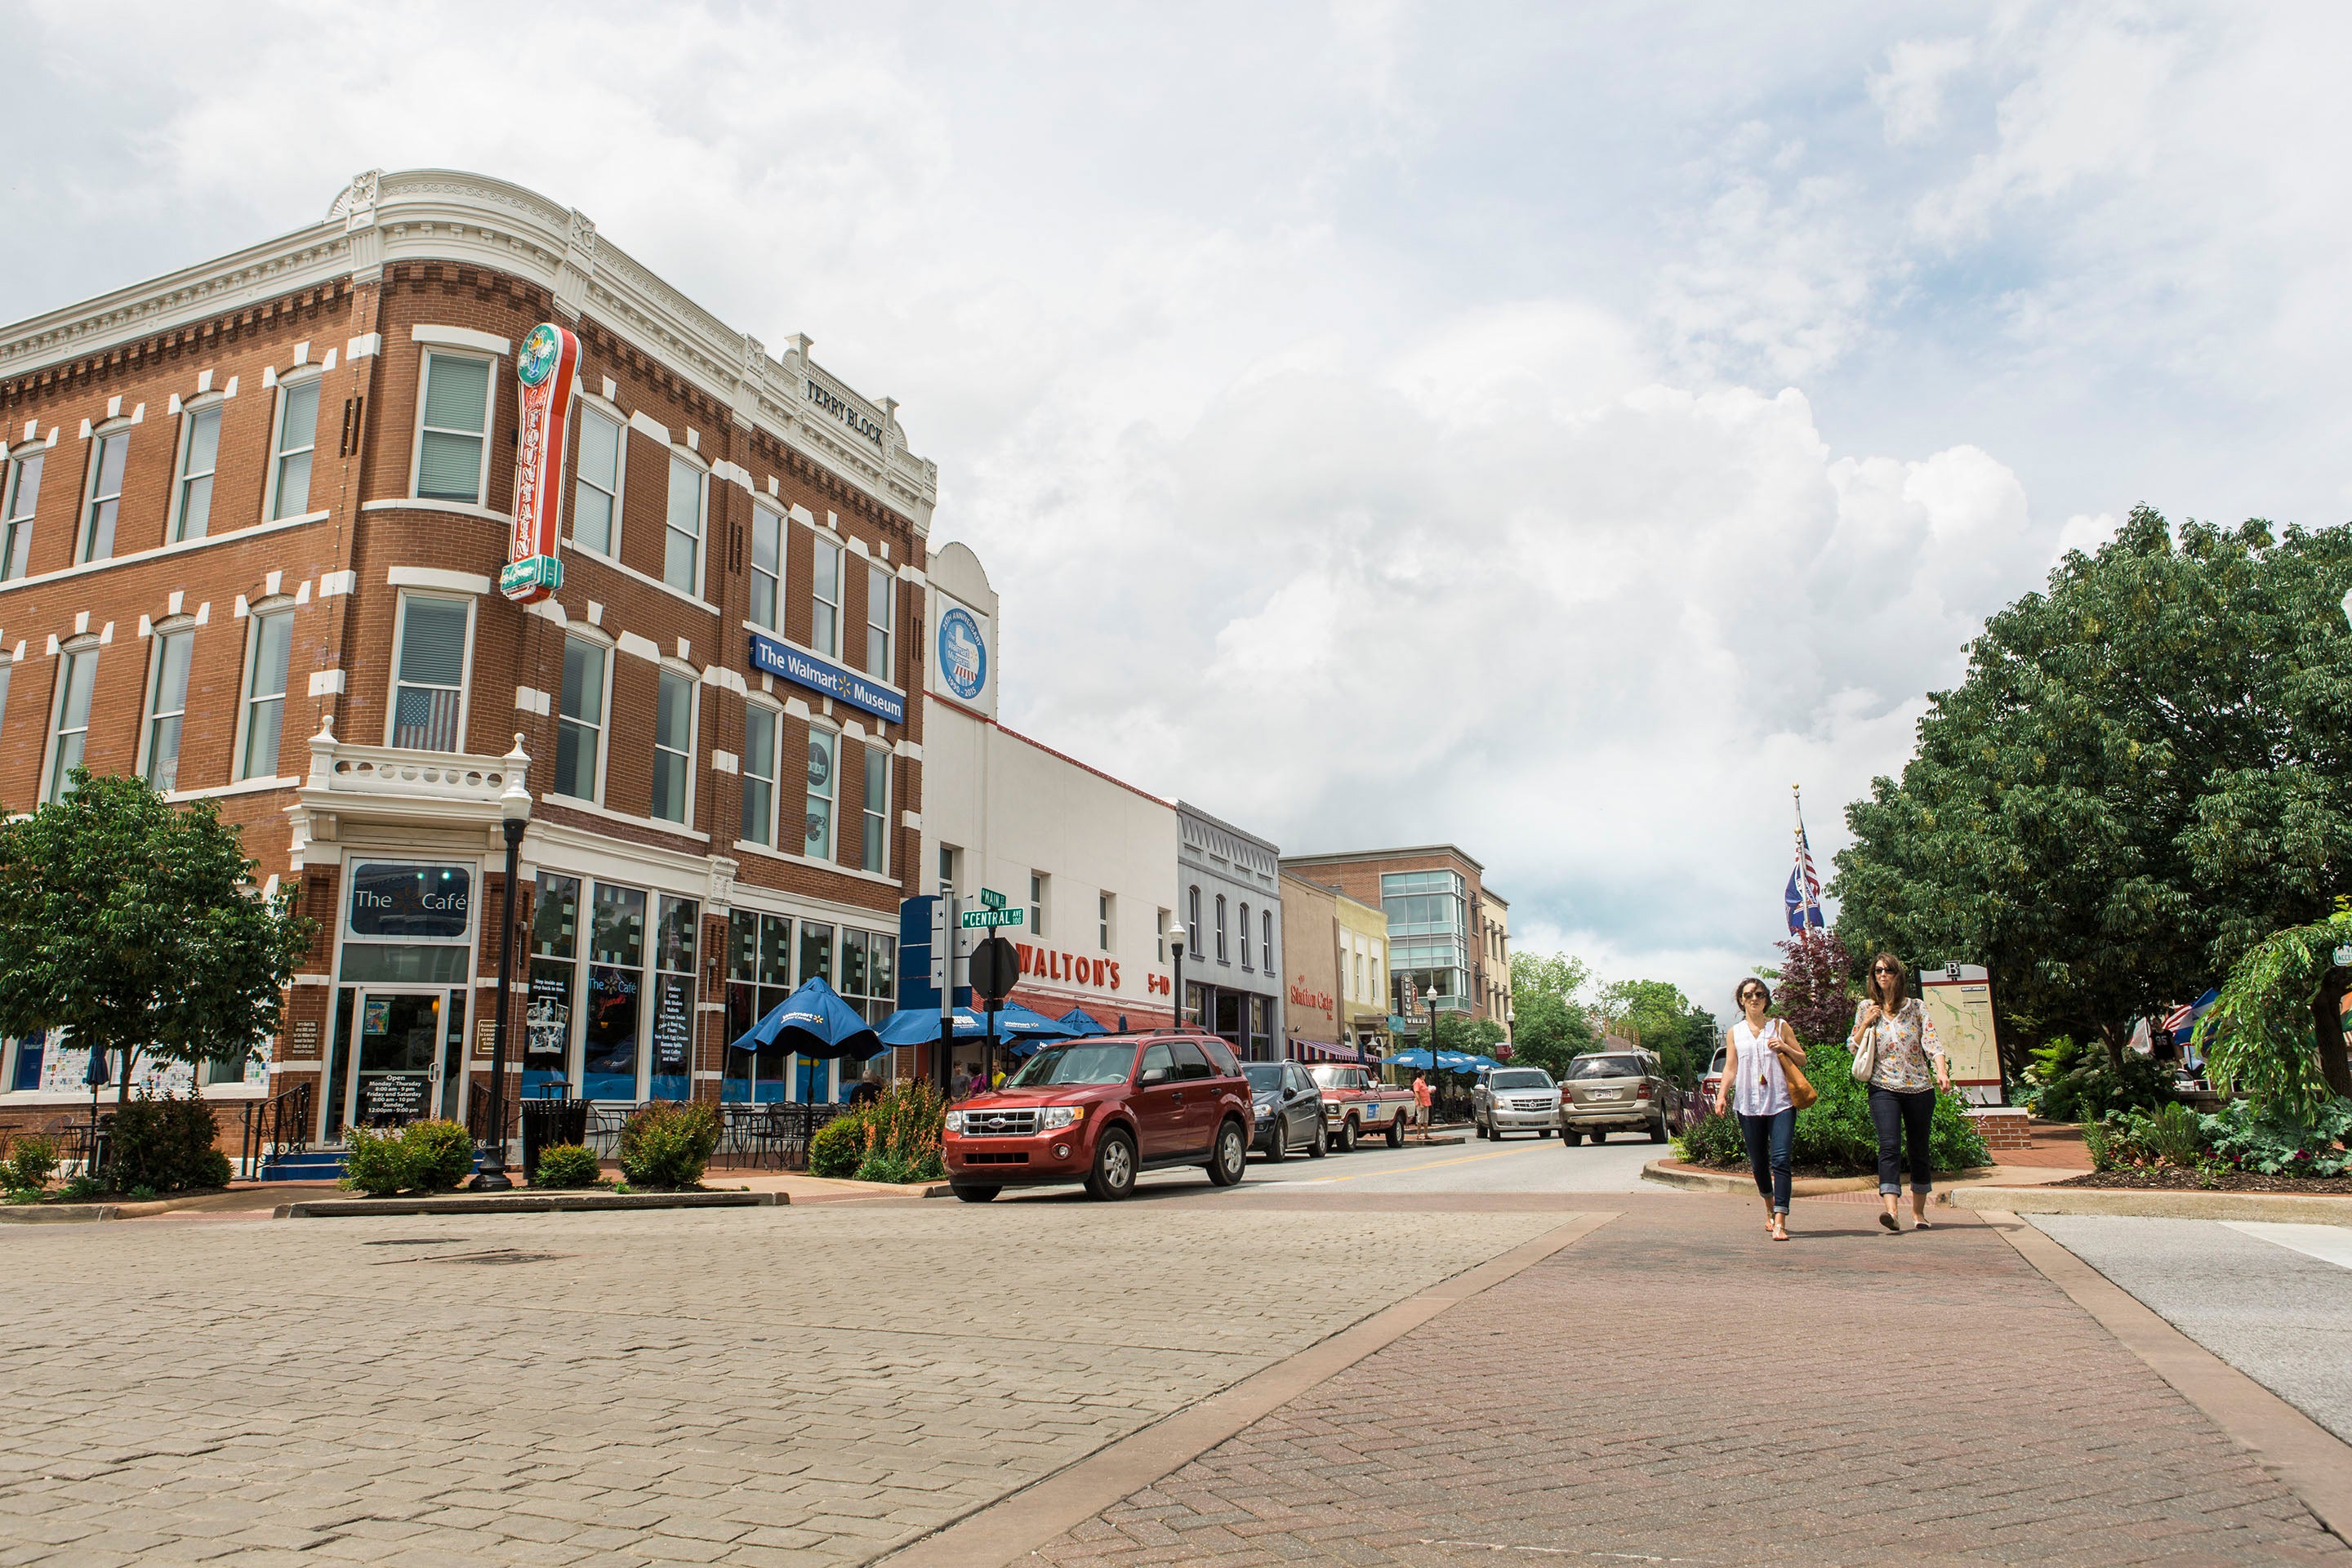 You’ll find boutique stores, bars, restaurants and cafes in Downtown Square